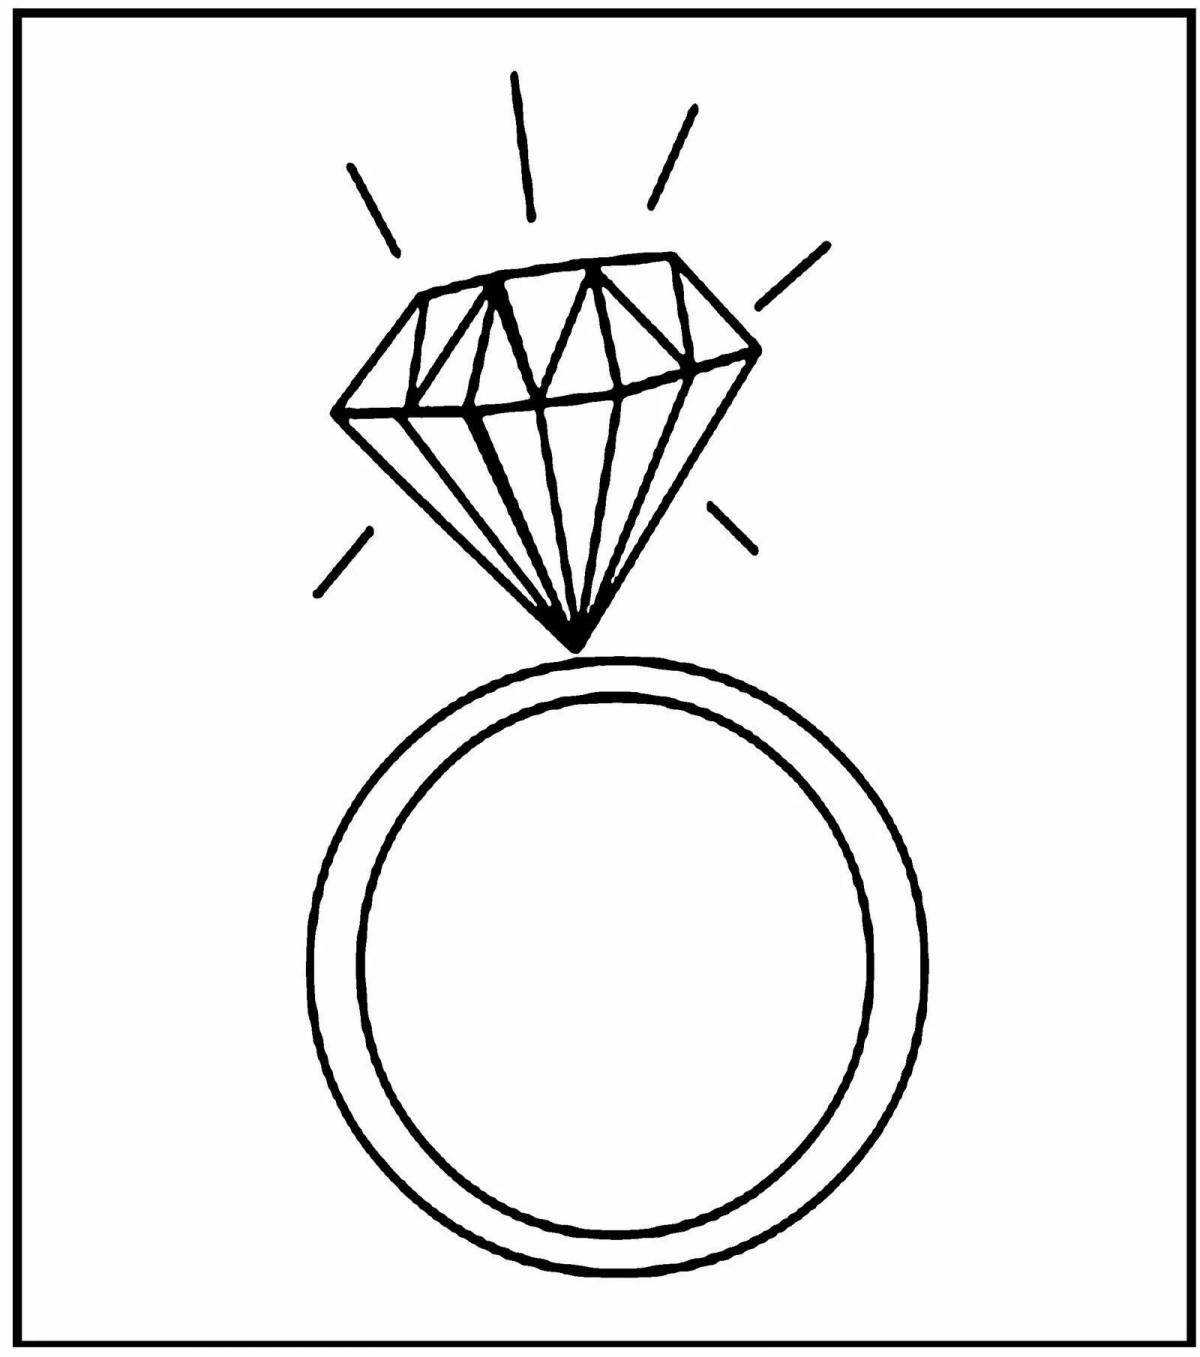 Coloring book shiny ring for schoolchildren